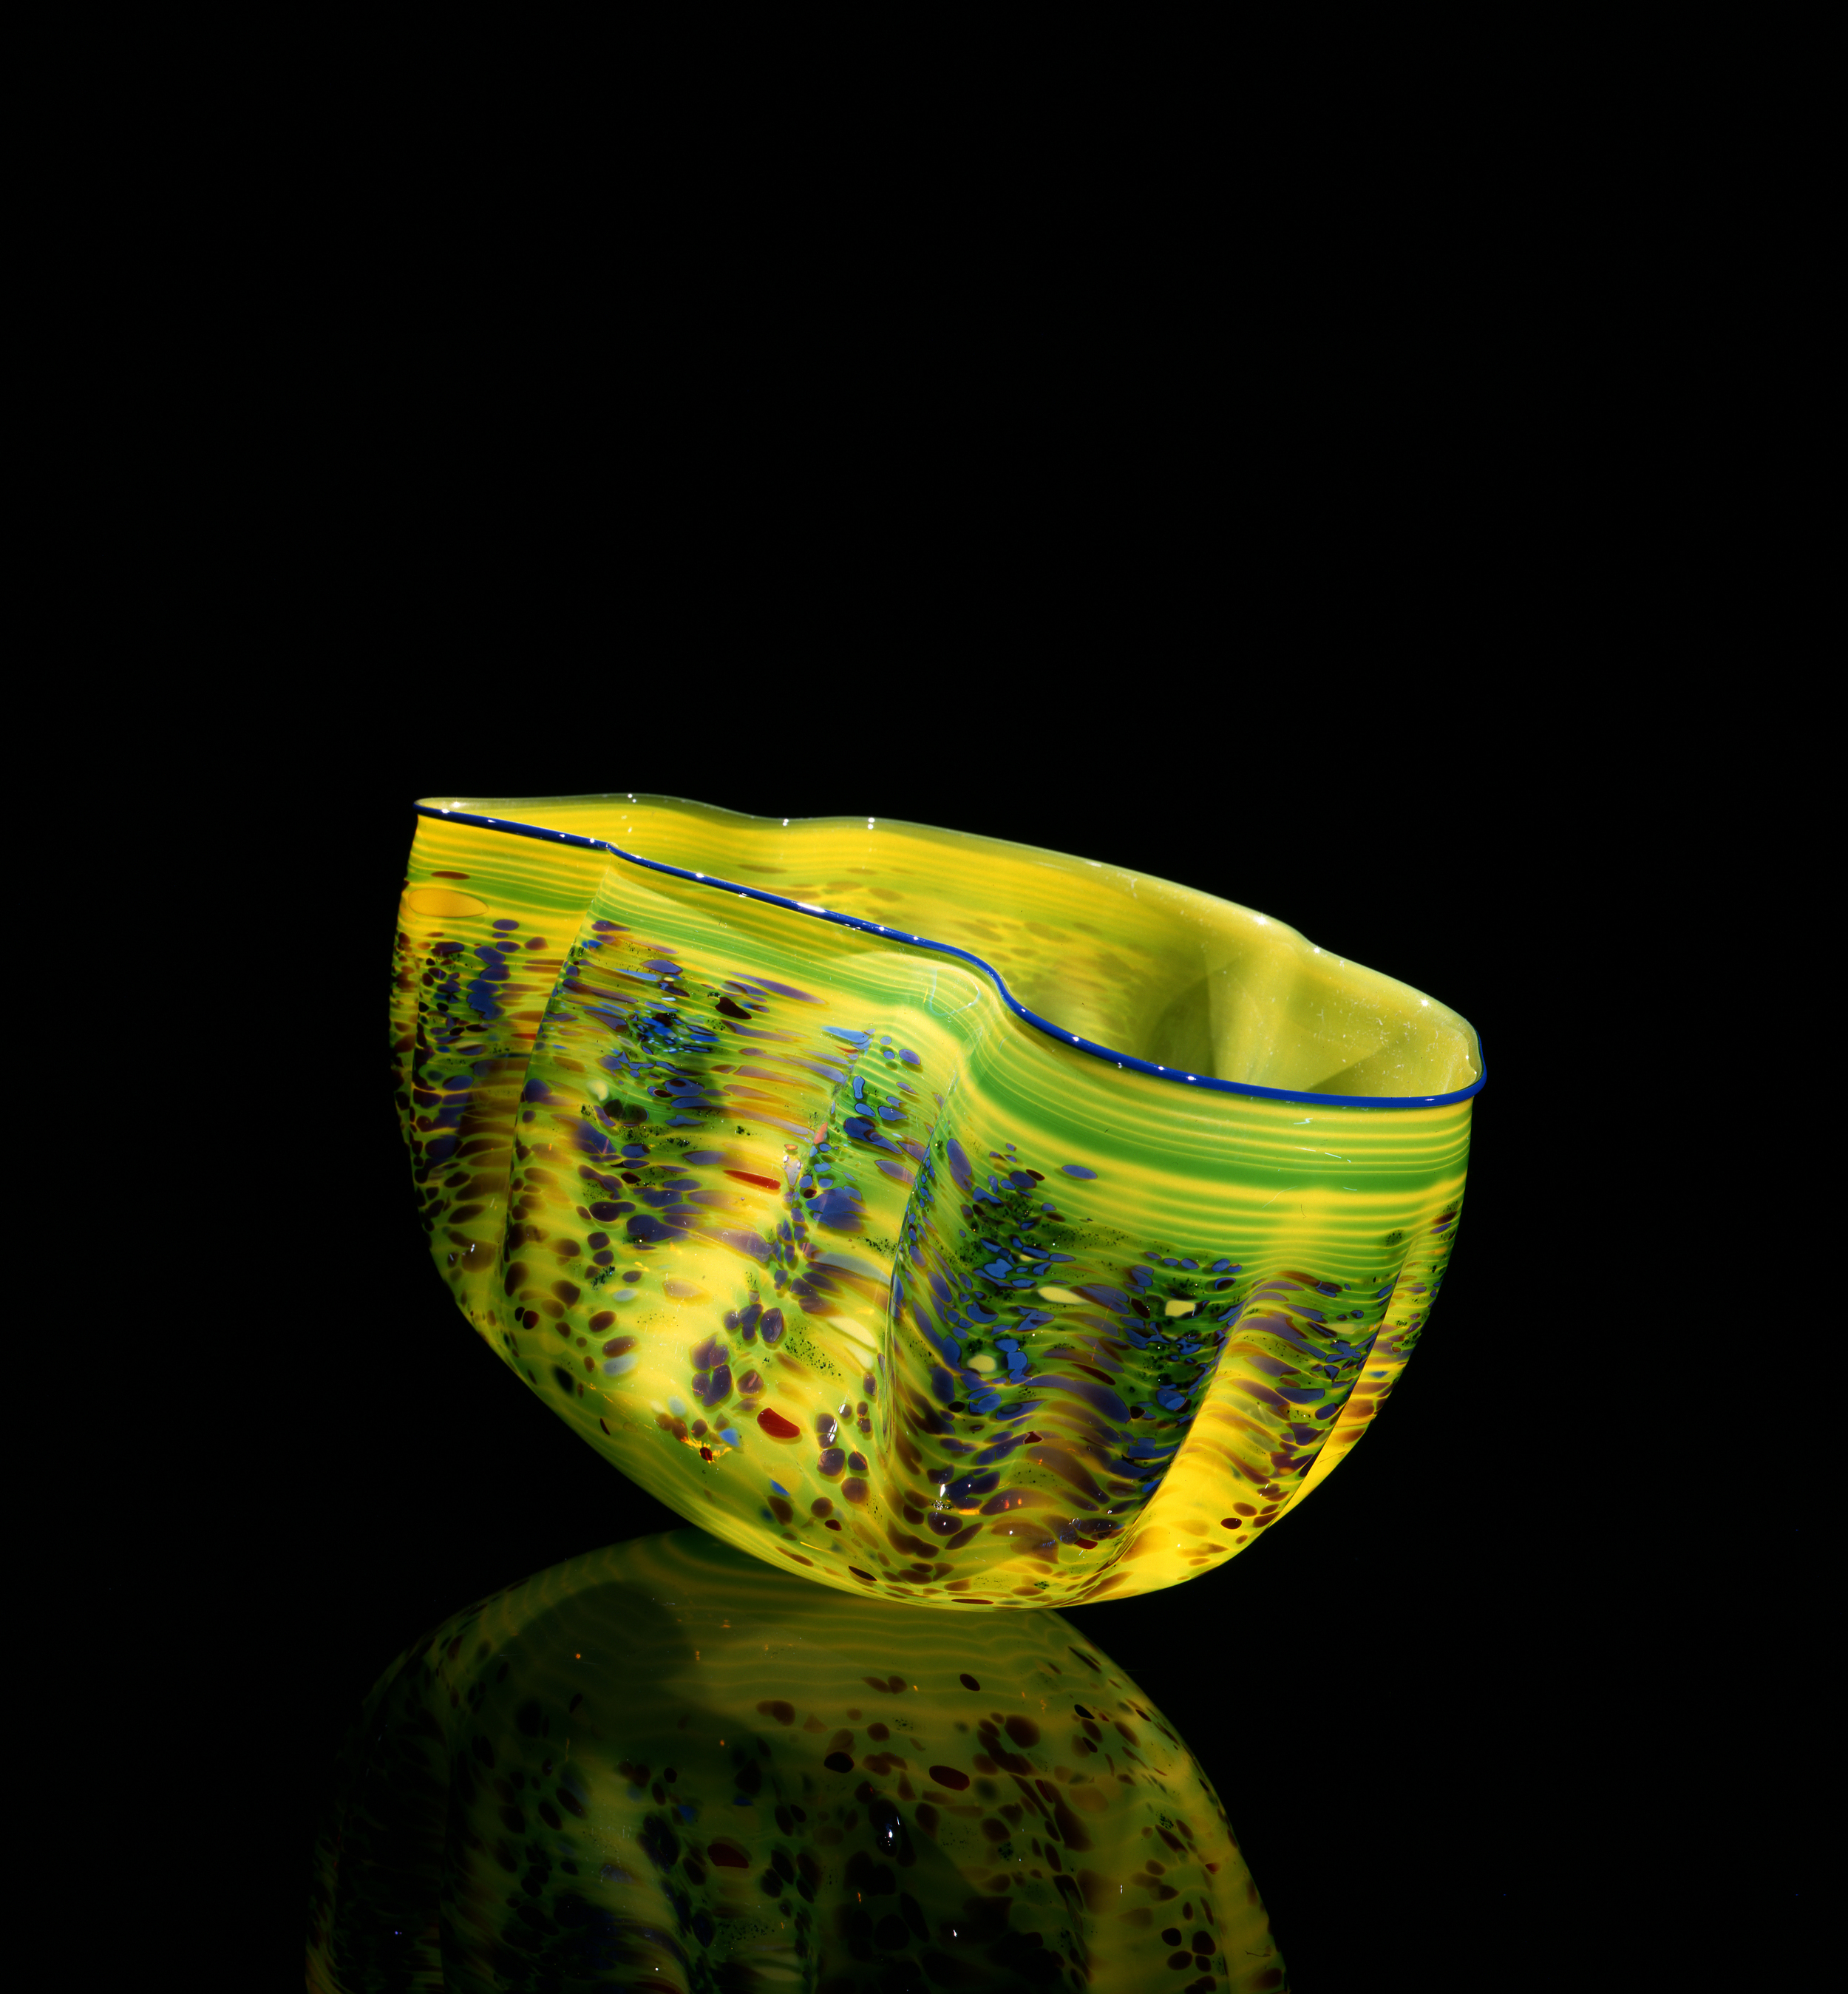  Dale Chihuly,&nbsp; Succory Green Macchia with Aniline Lilac Lip Wrap&nbsp; (1984, glass, 7 x 12 x 8 inches), DC.133 